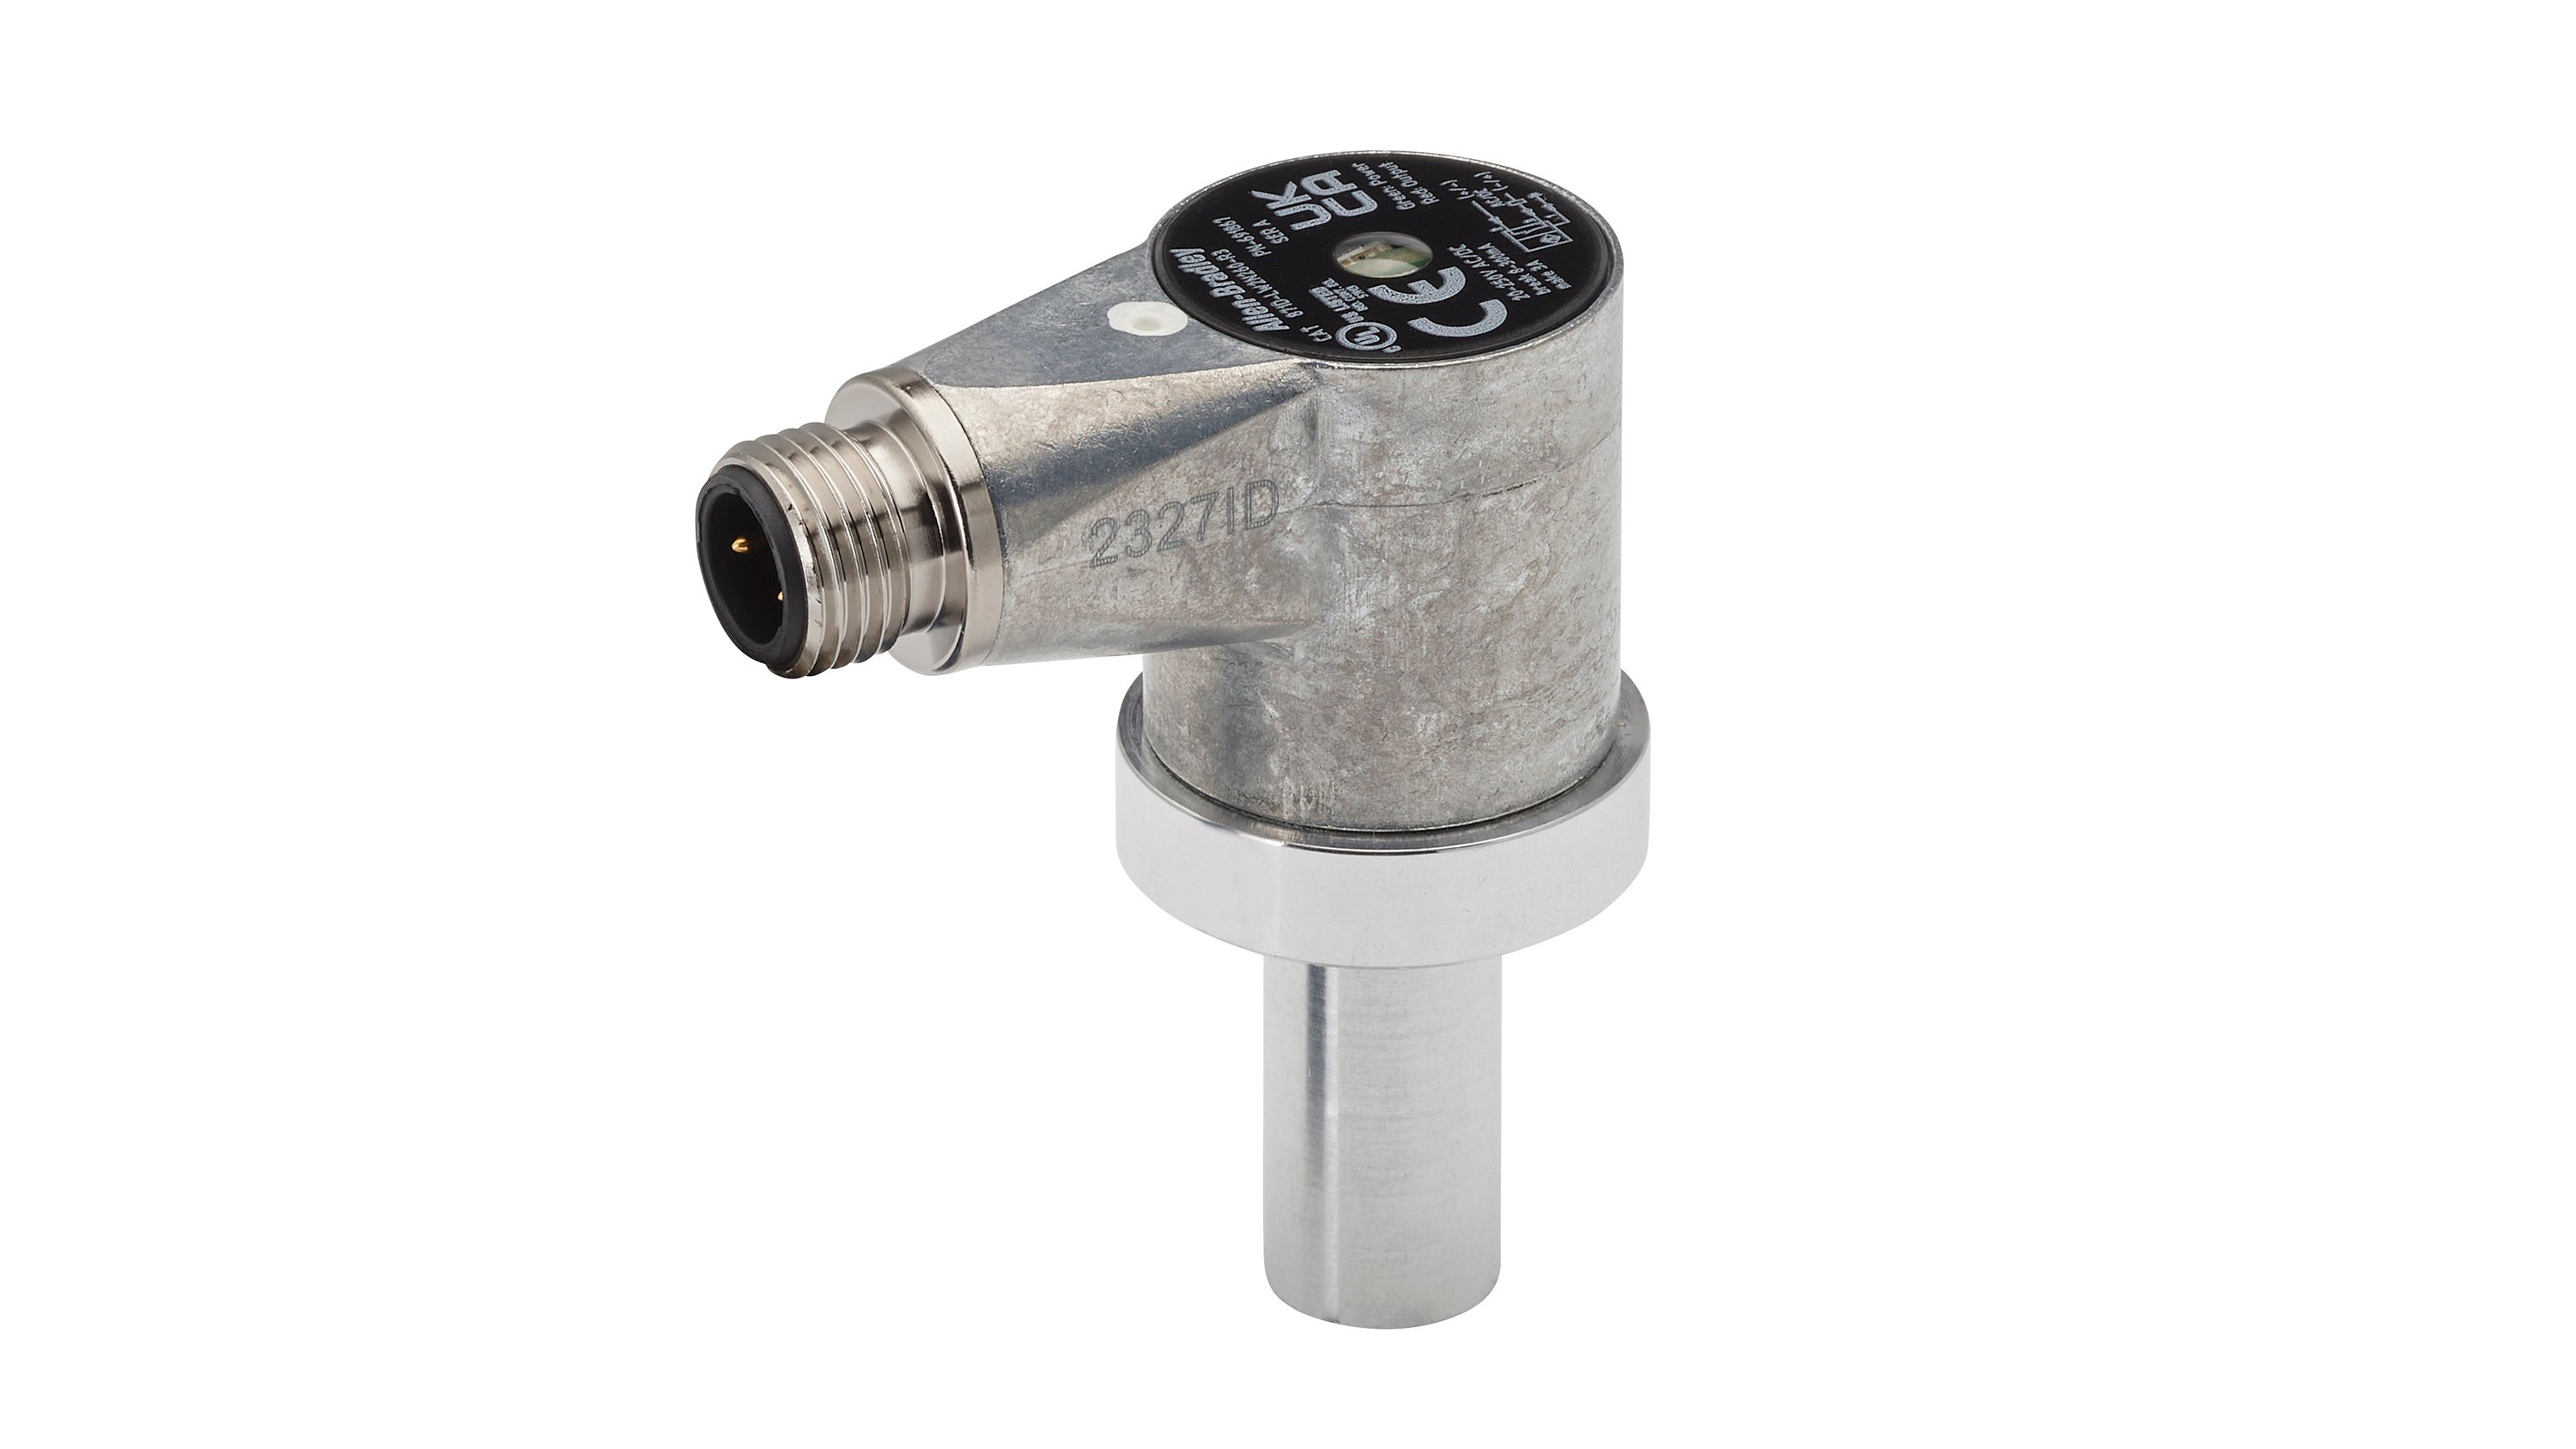 Low-profile 871D cylinder position proximity sensor with aluminum housing with stainless steel sensor probe facing down and connector facing left.